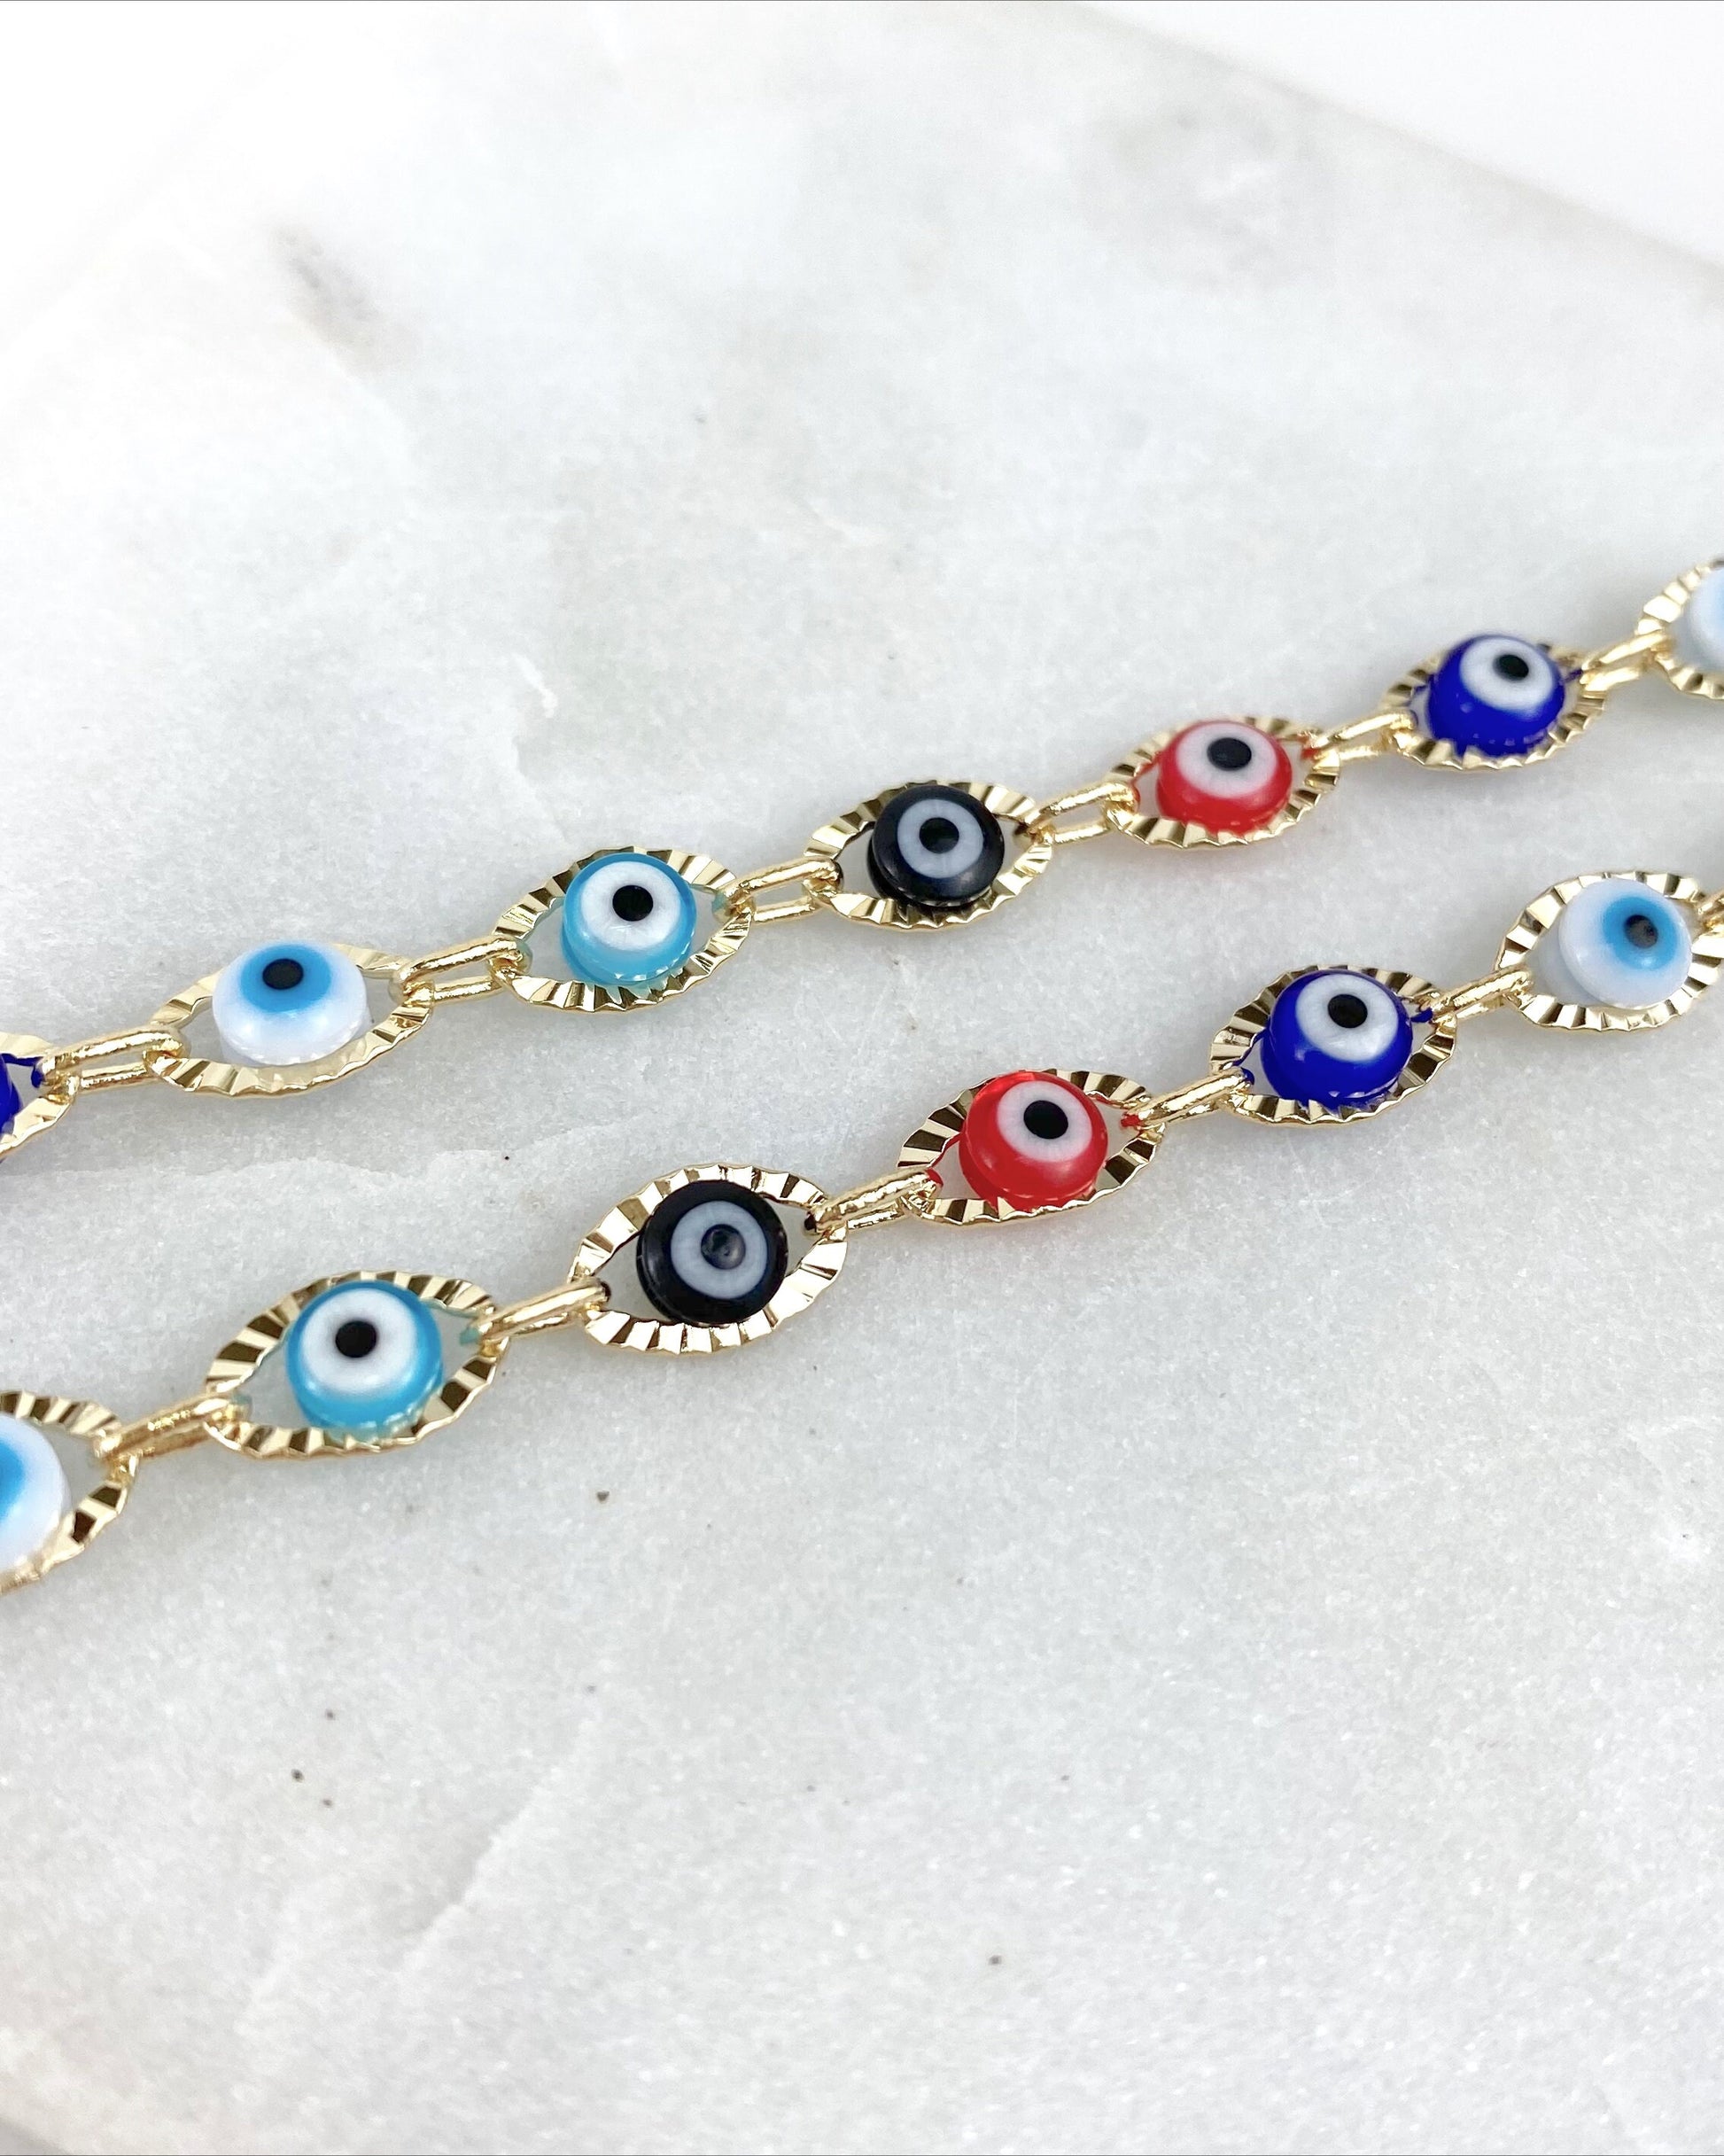 18k Gold Filled Fancy 6mm Colorful Colored, Red, Blue & Black Evil Eye Protection Bracelet or Anklet for Wholesale Jewelry Supplies